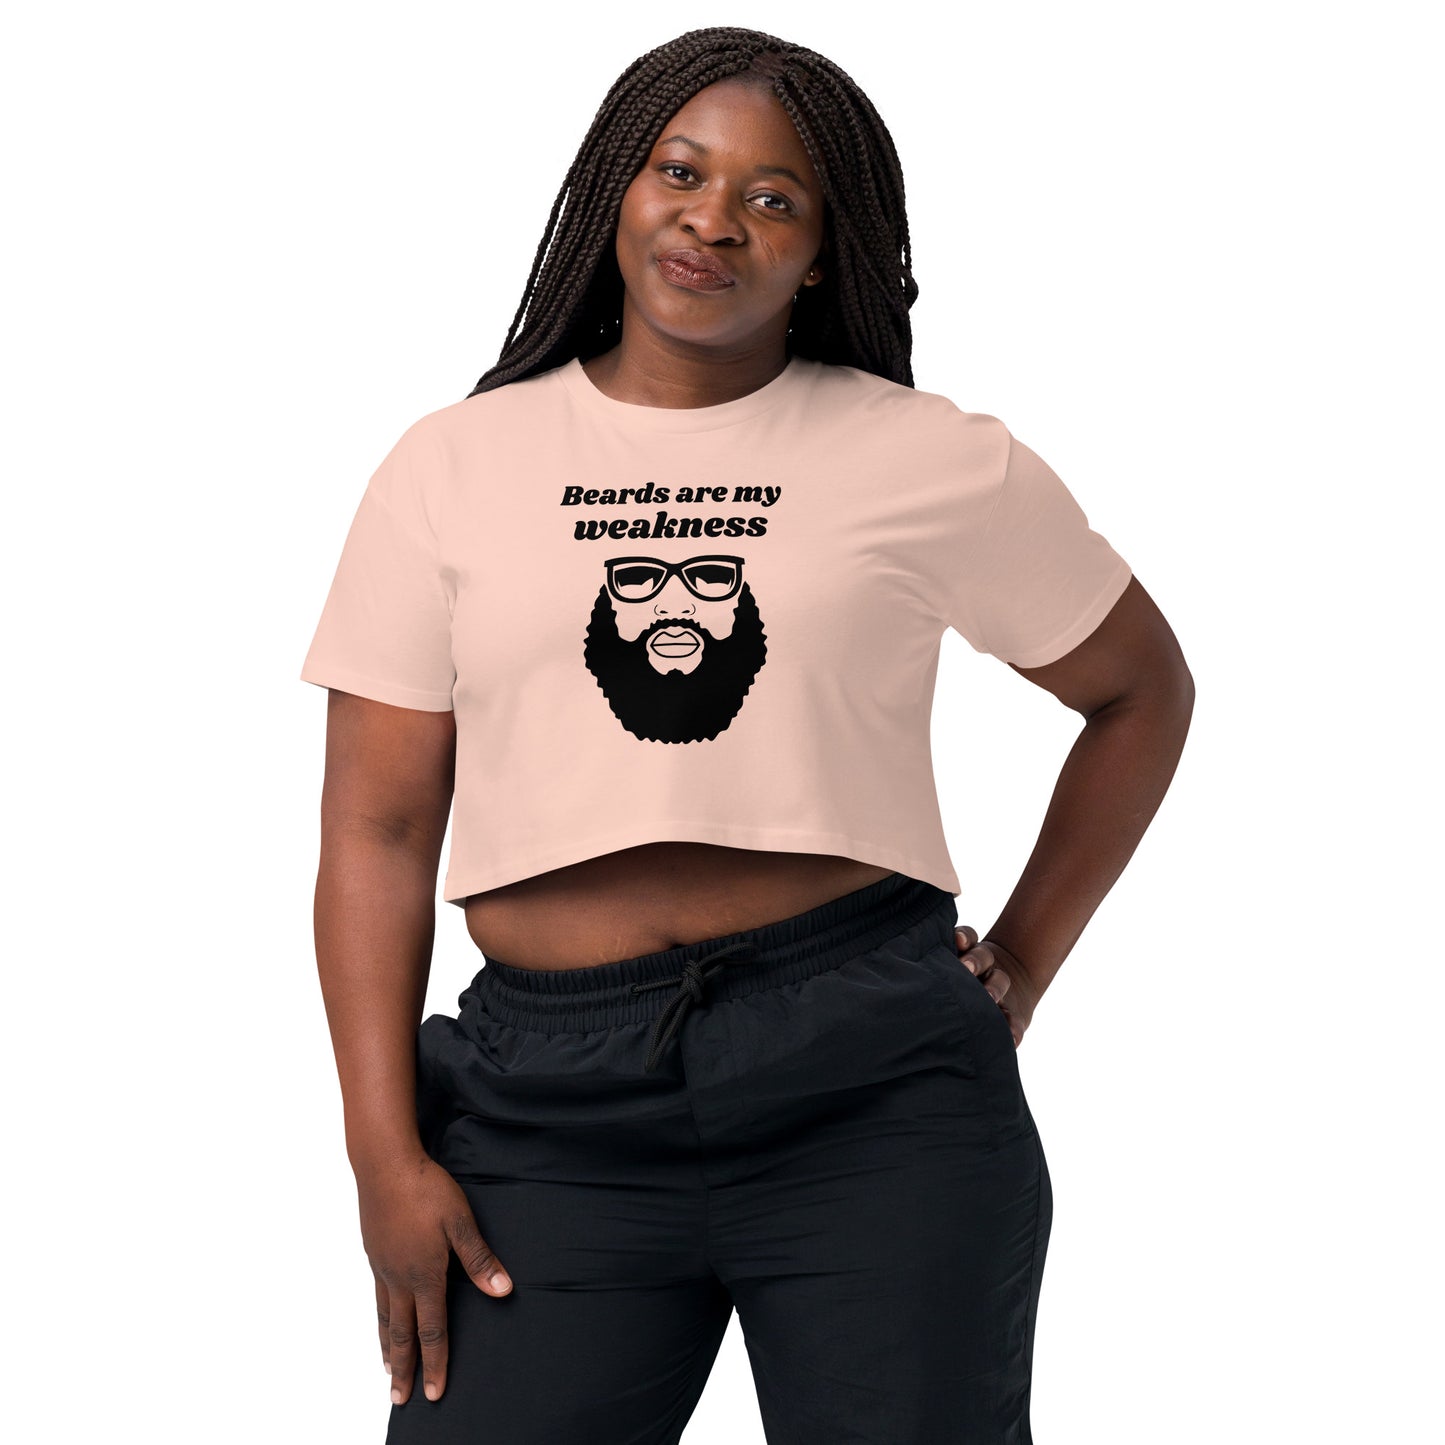 Beard's Are My Weakness Crop Top (NEW)